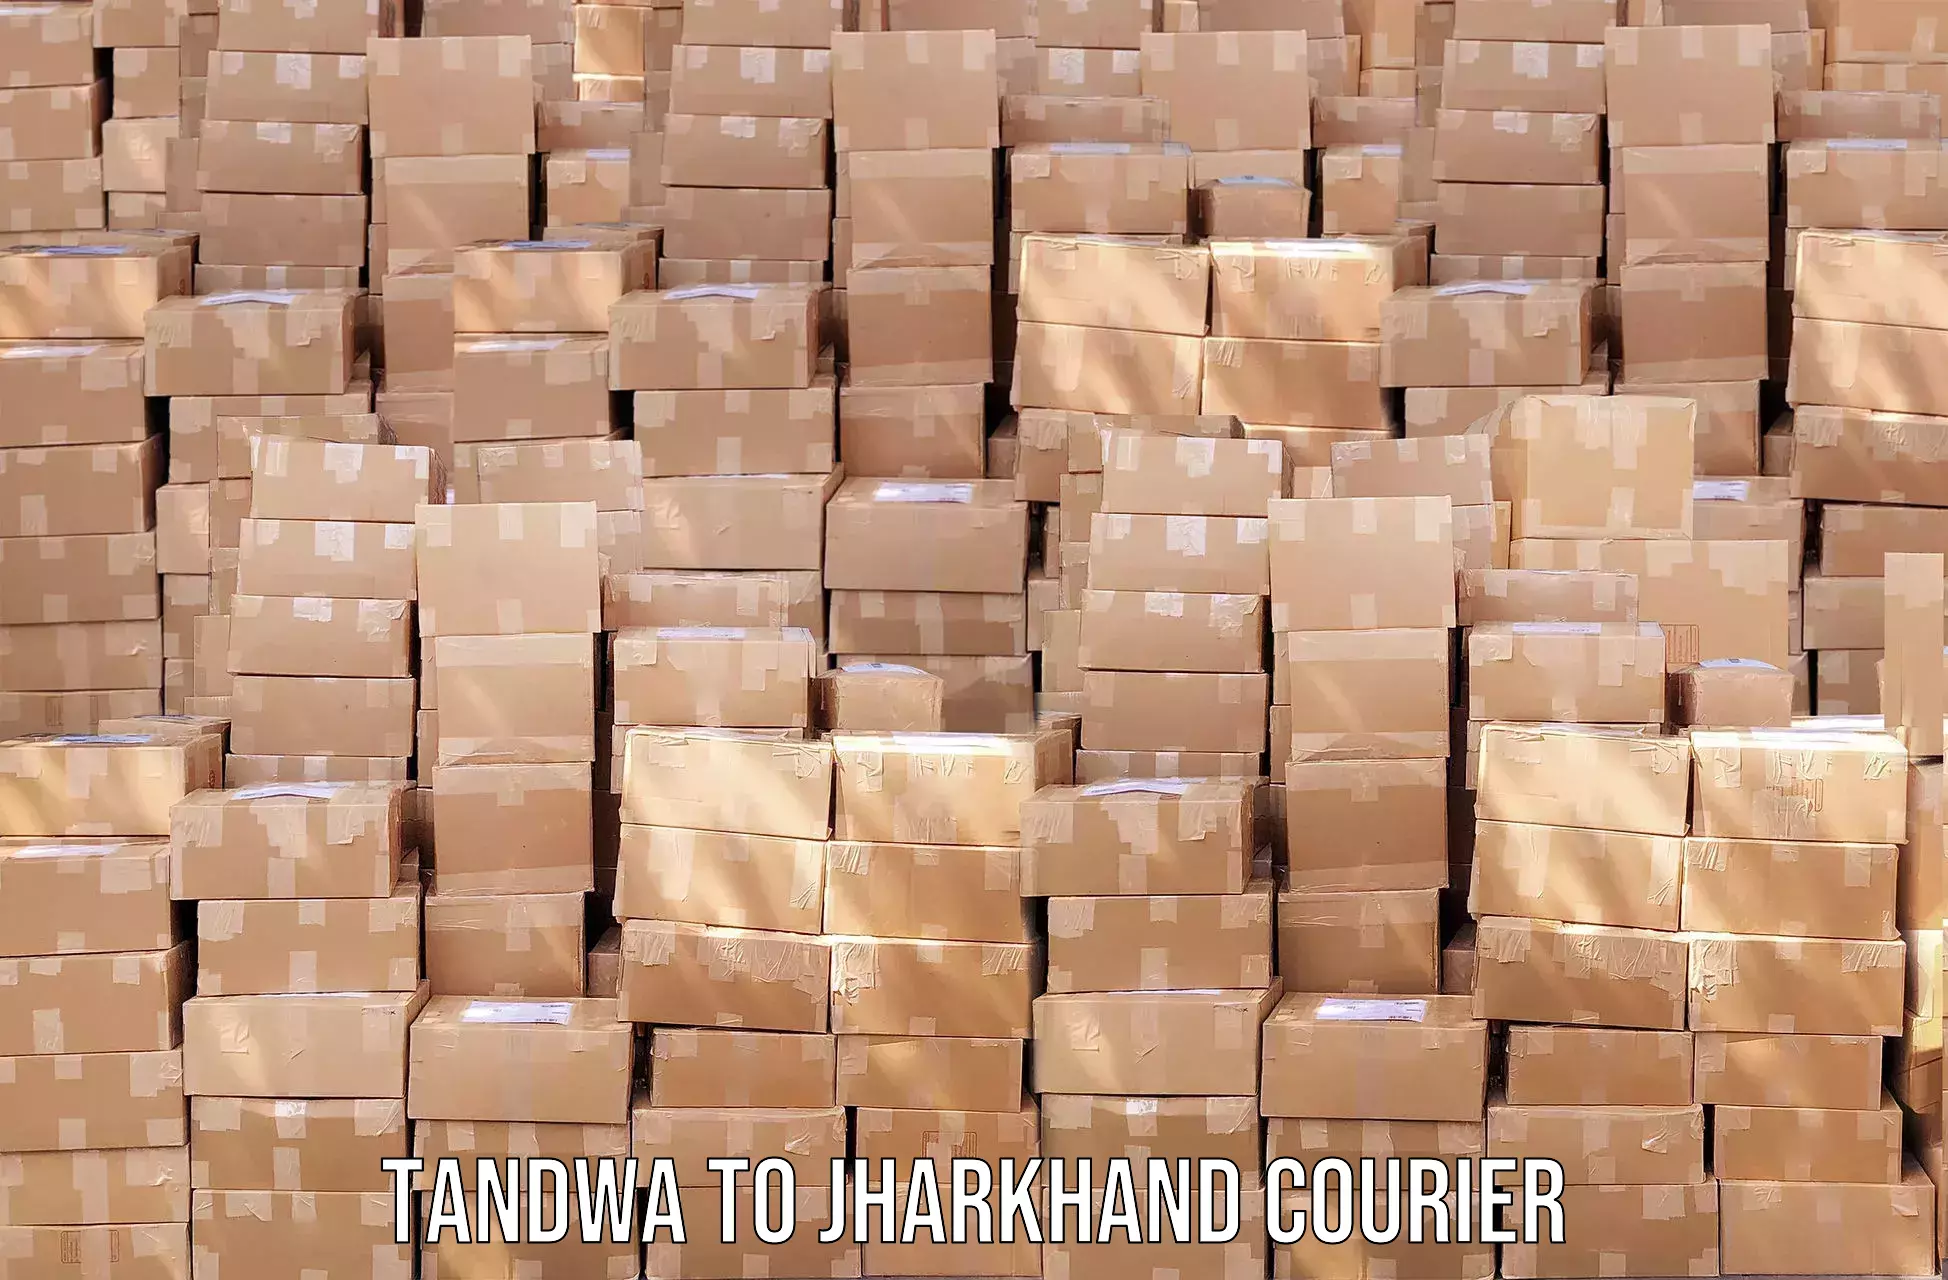 Cargo delivery service Tandwa to Jamshedpur